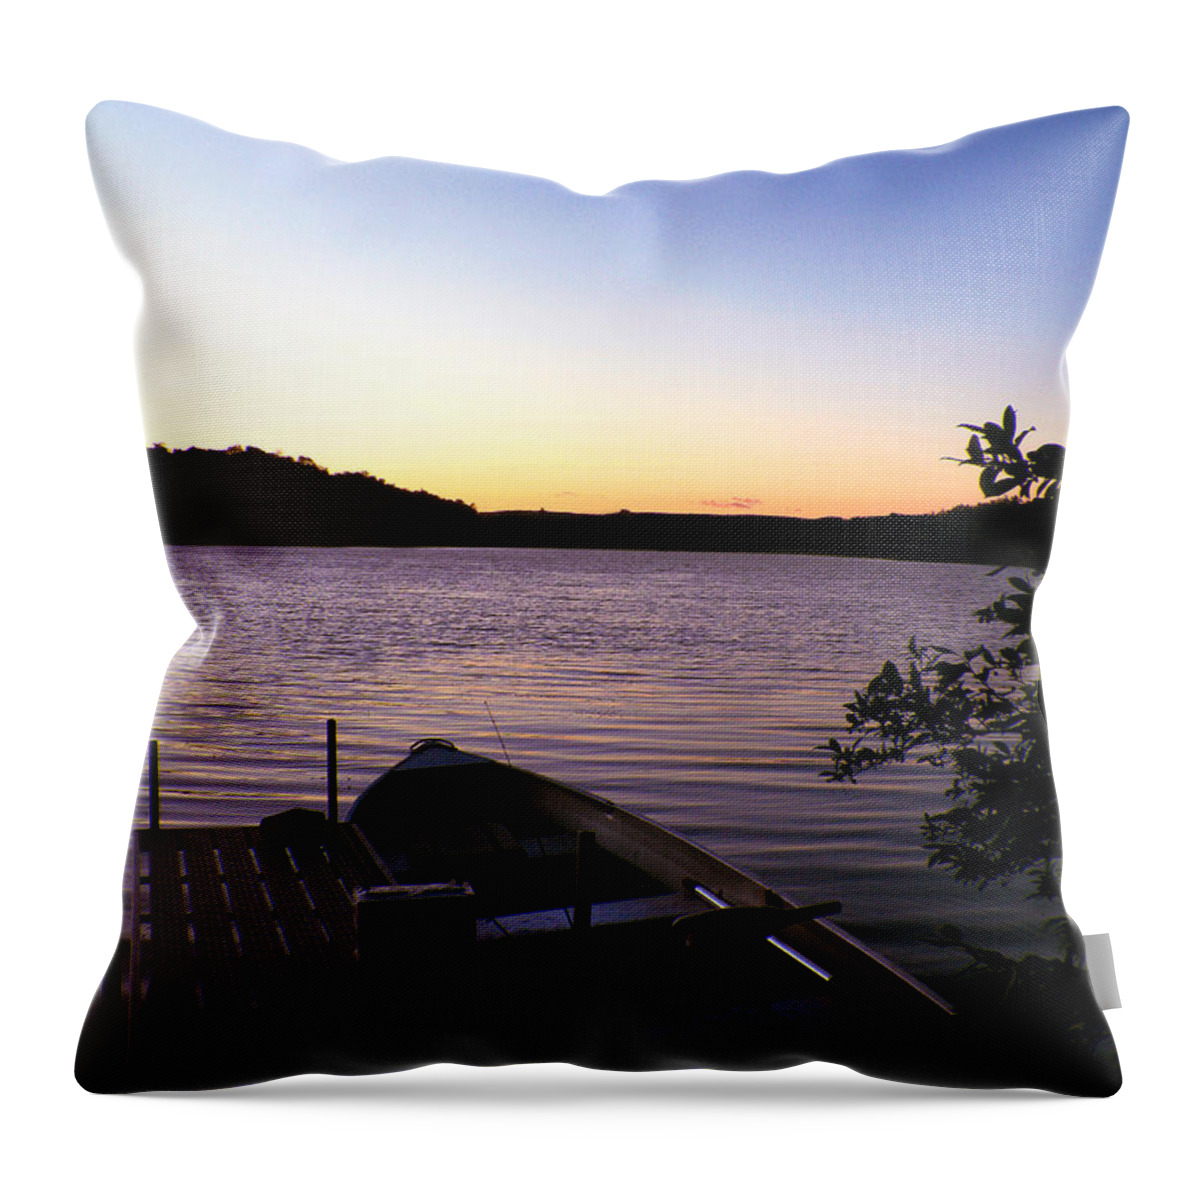 Blue Throw Pillow featuring the photograph Evening Catch by Joseph Noonan